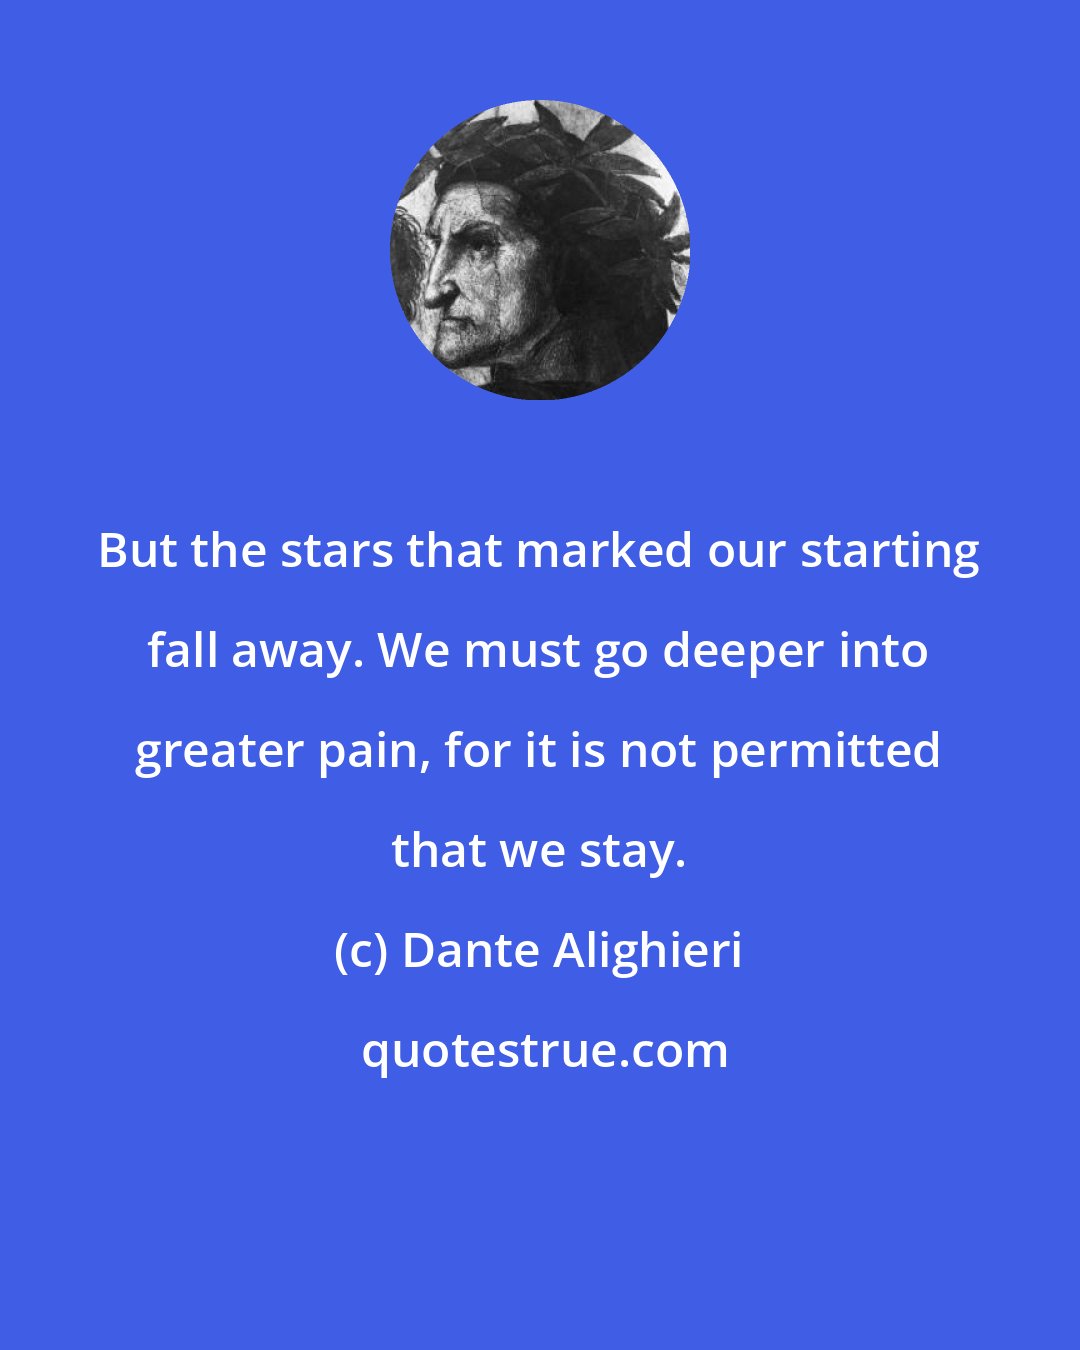 Dante Alighieri: But the stars that marked our starting fall away. We must go deeper into greater pain, for it is not permitted that we stay.